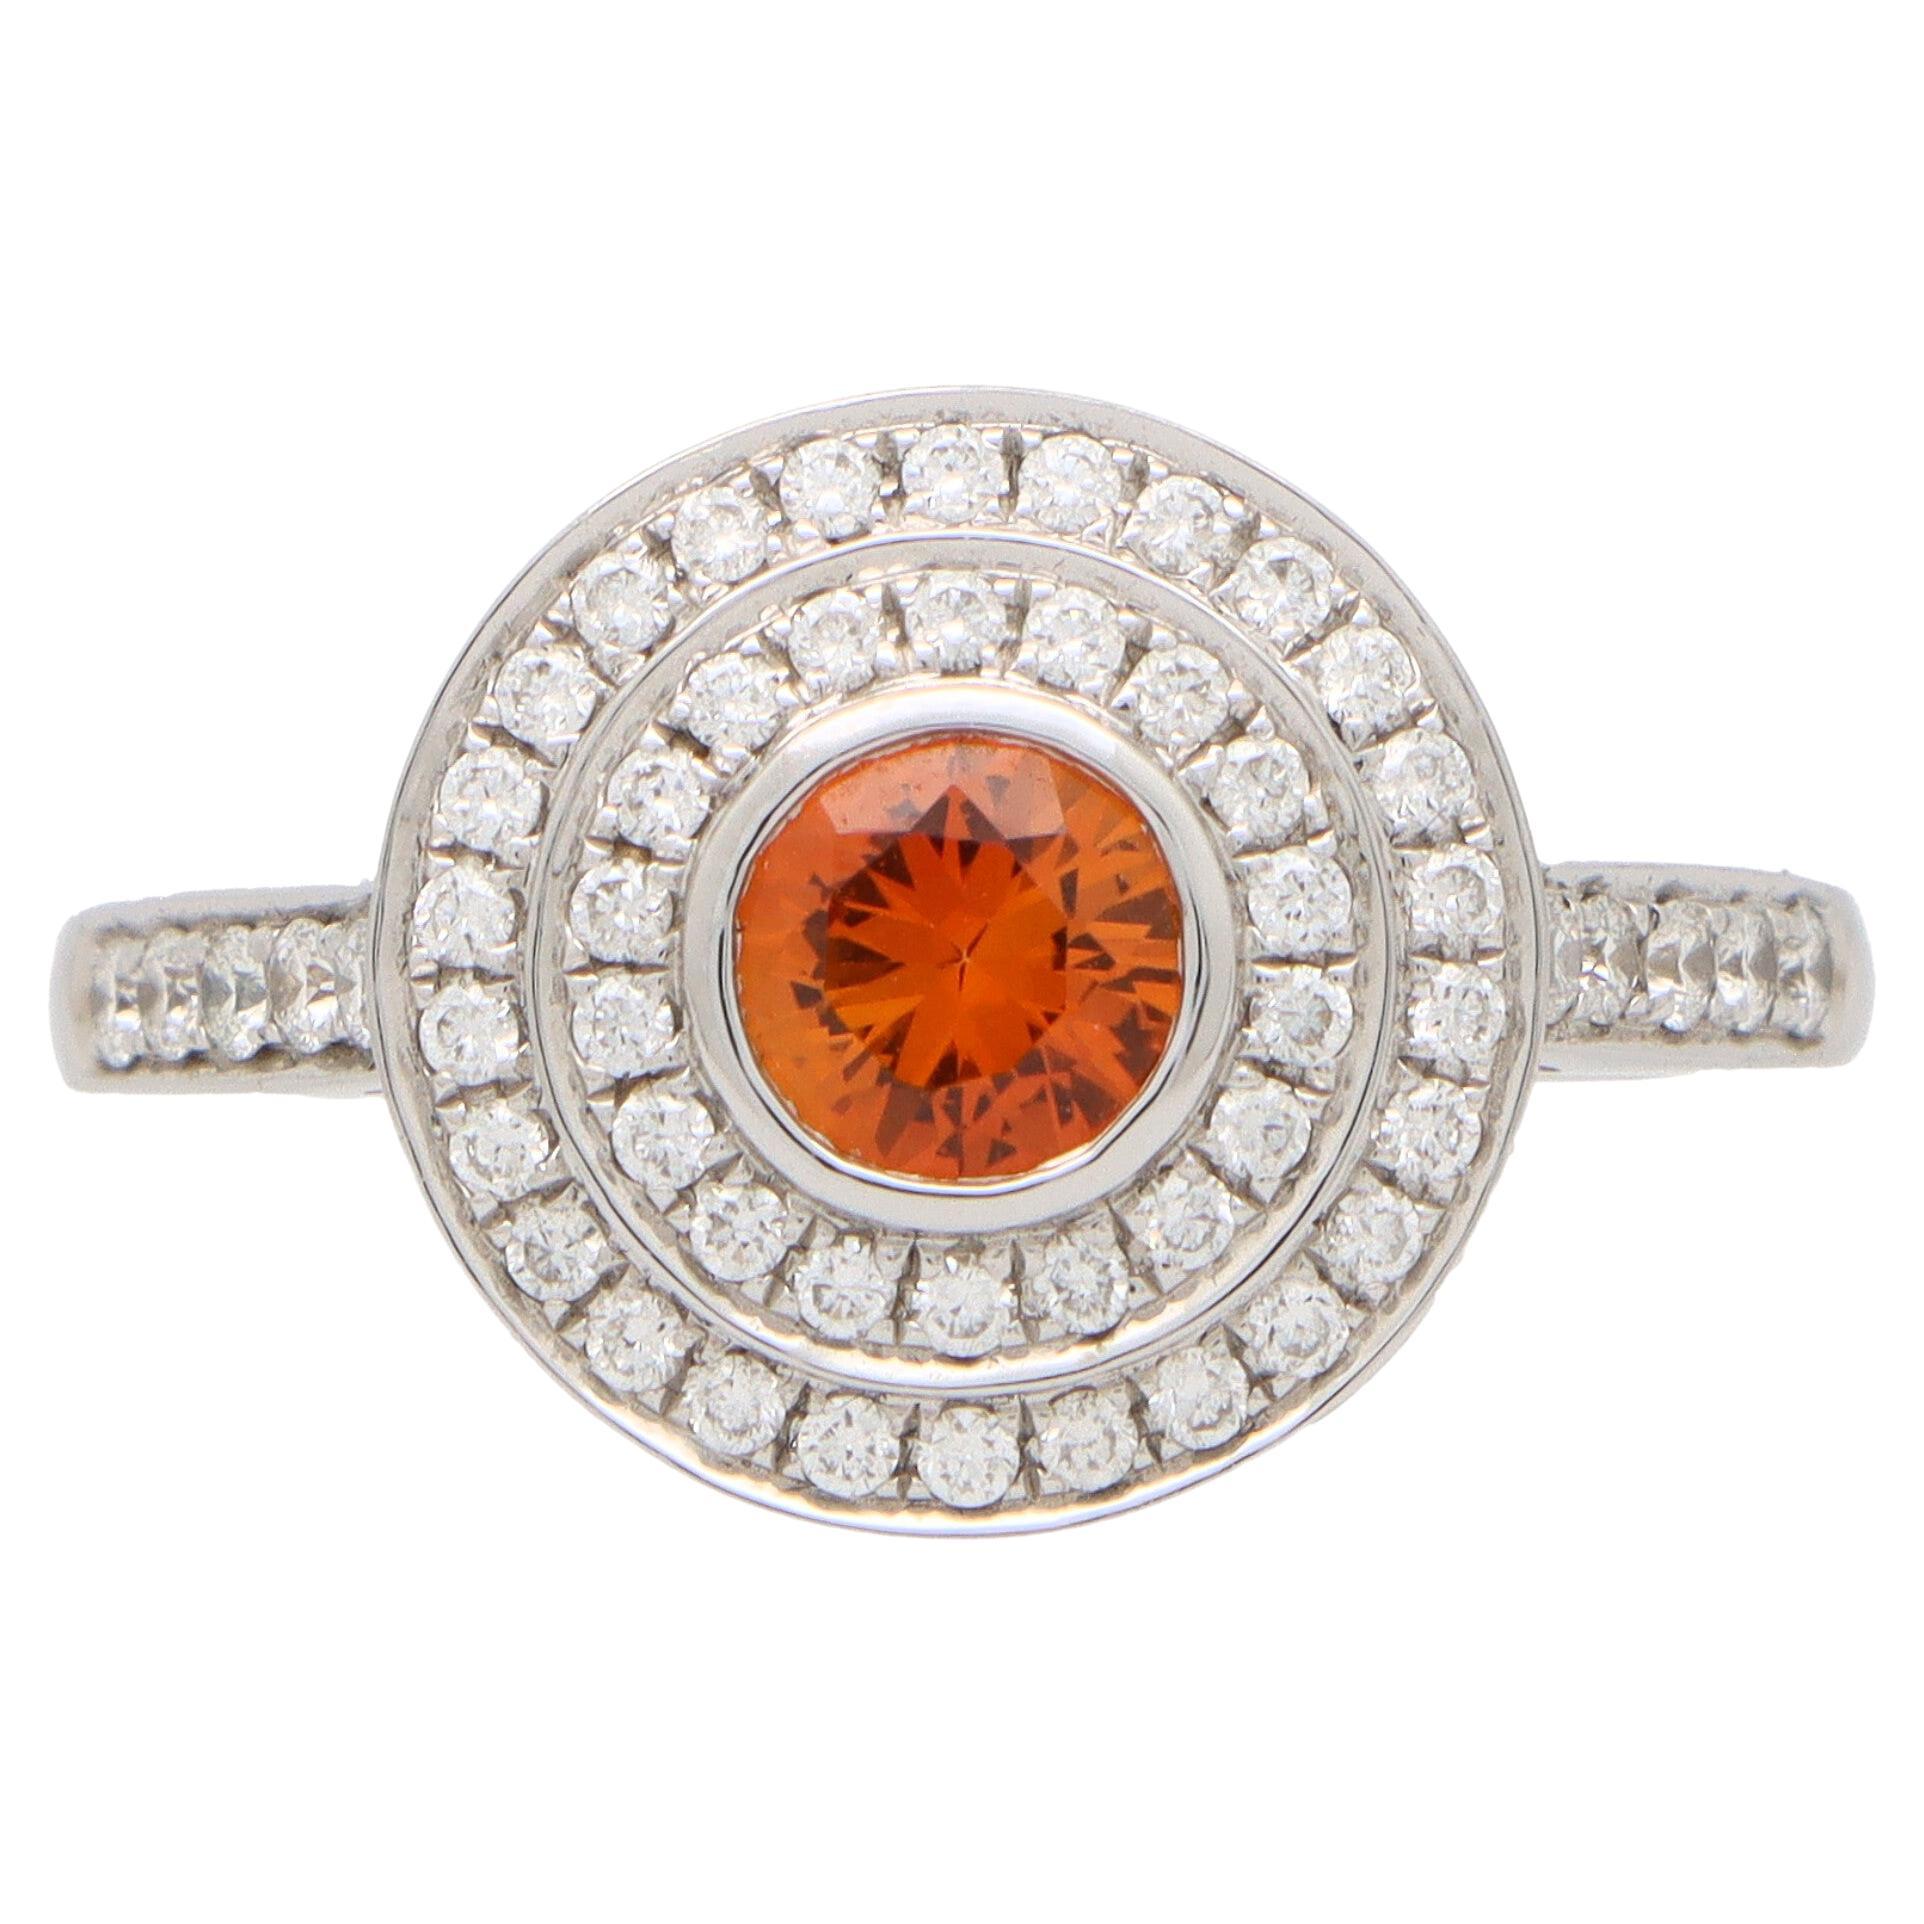 Orange Sapphire and Diamond Double Target Ring Set in 18k White Gold